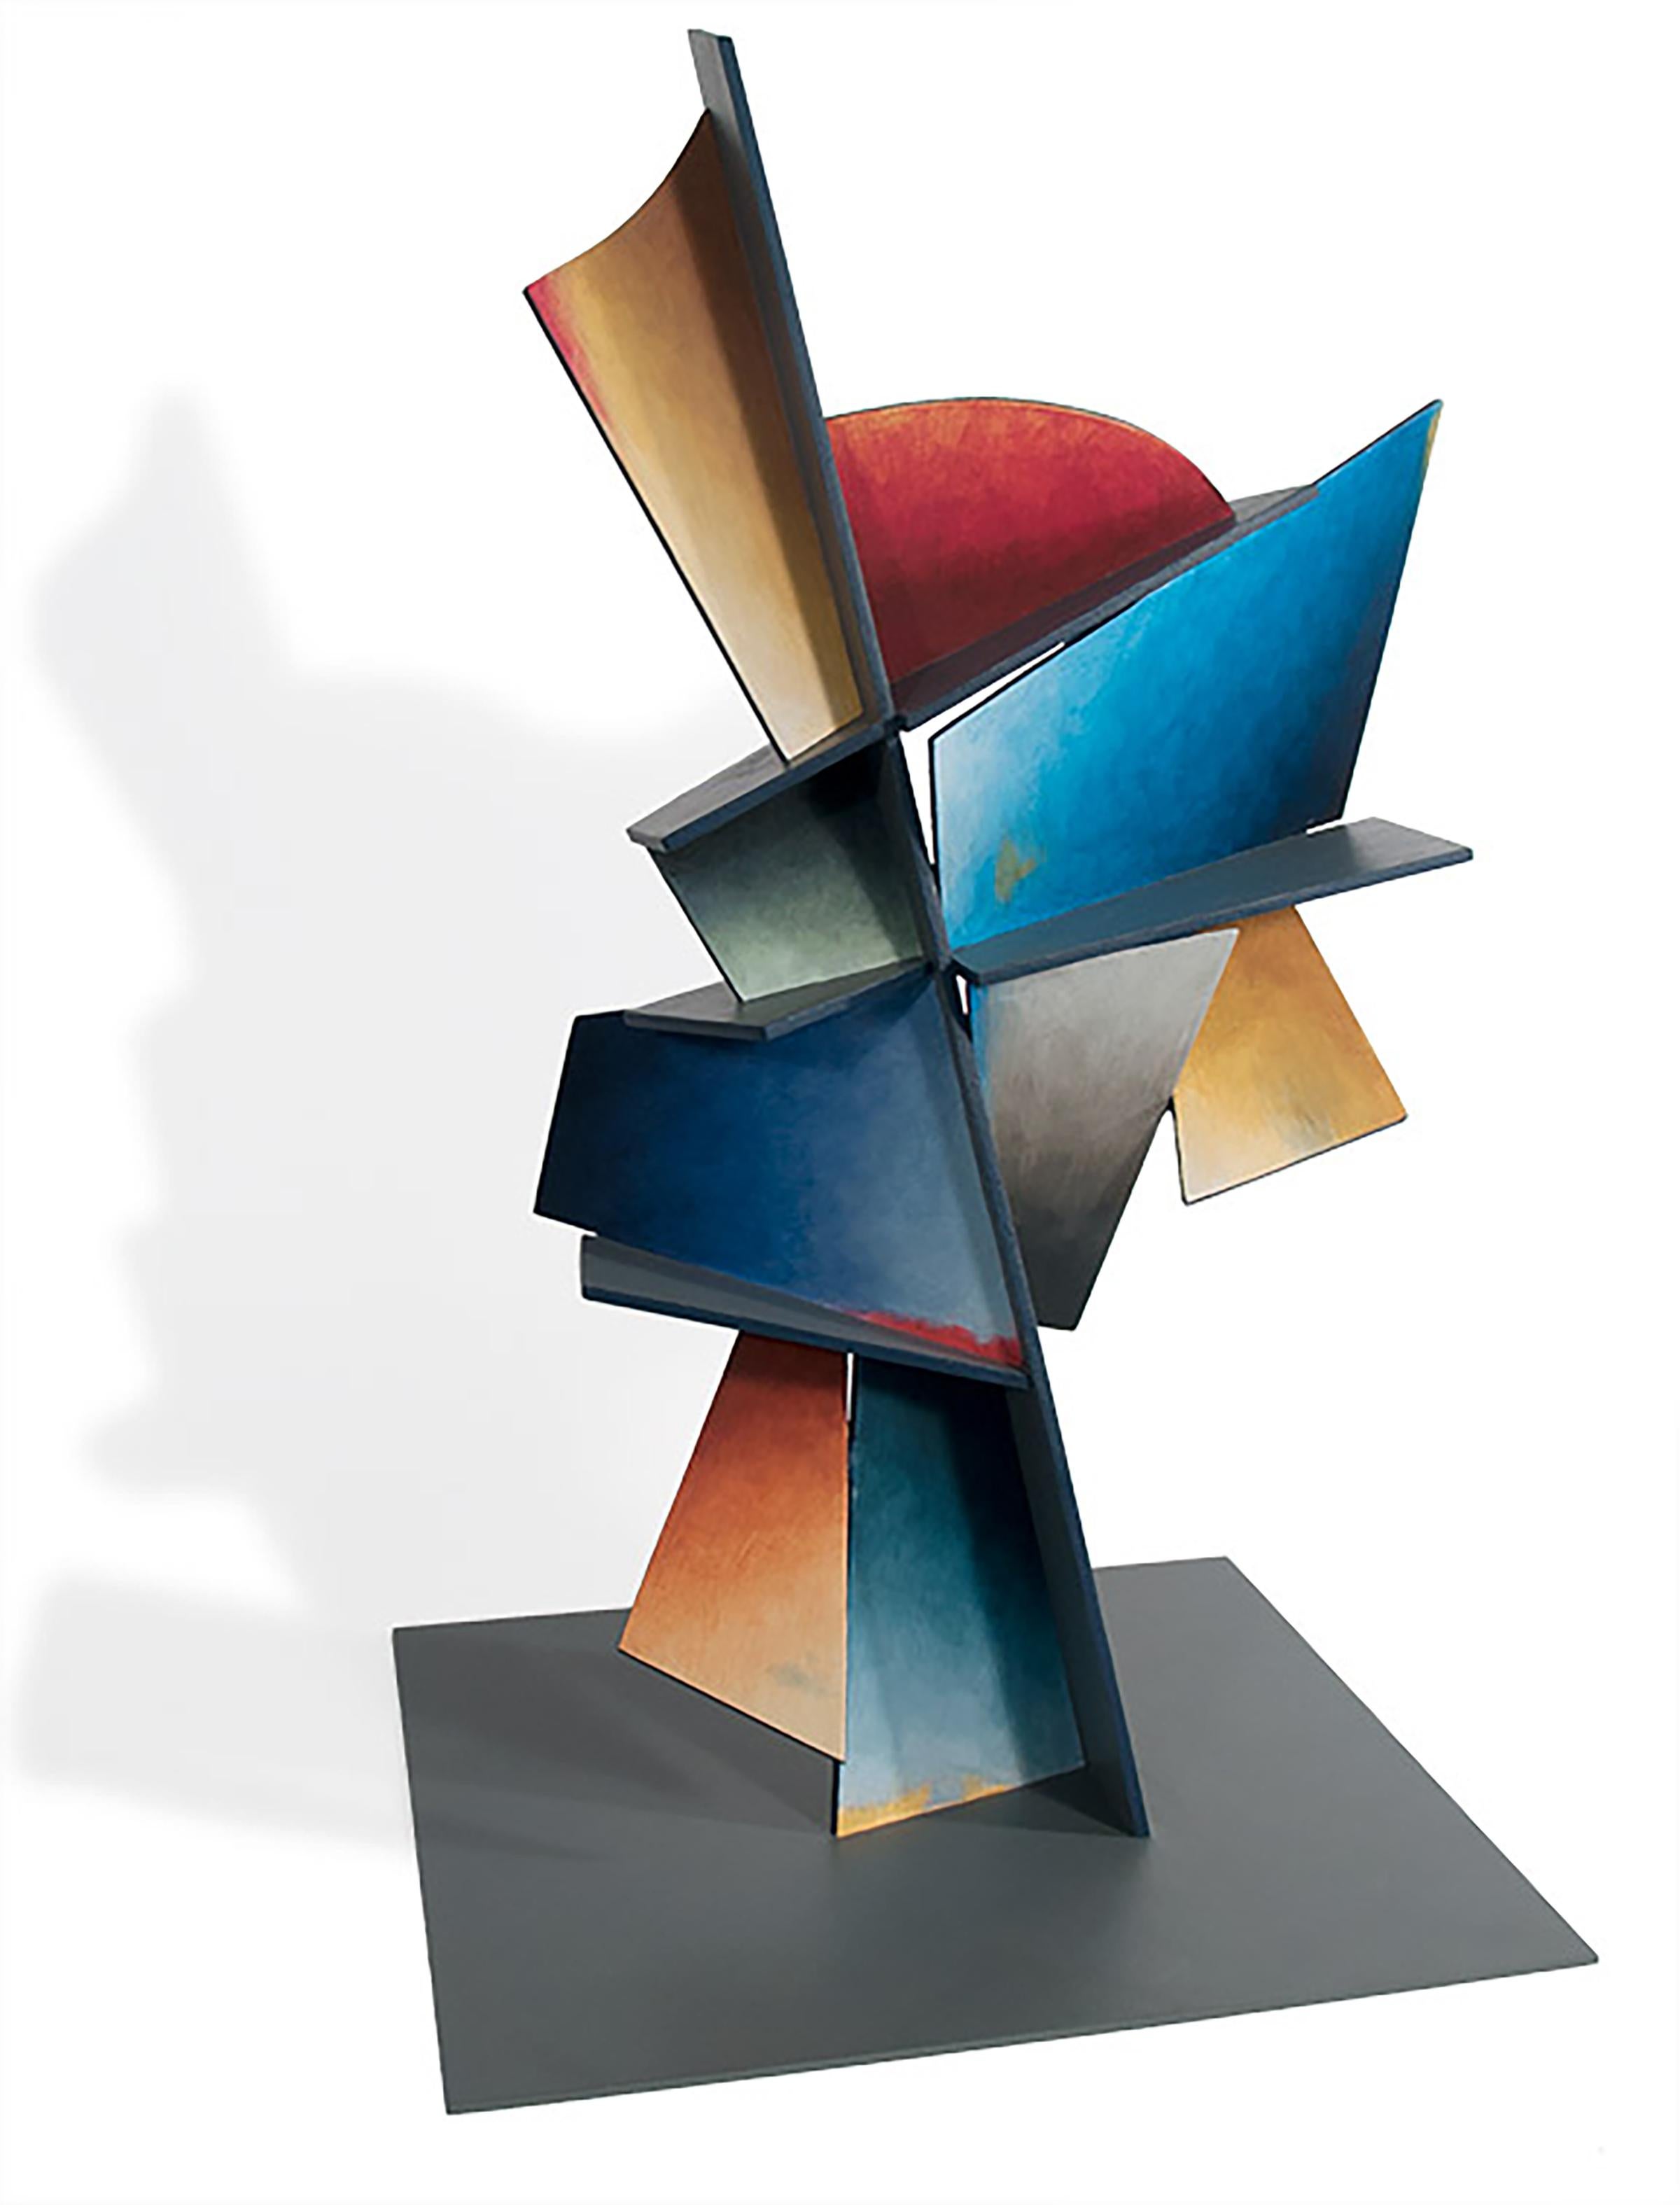 Hidden Hour - Hand Painted Welded Steel Sculpture Abstract Geometric Form - Mixed Media Art by Chris Hill